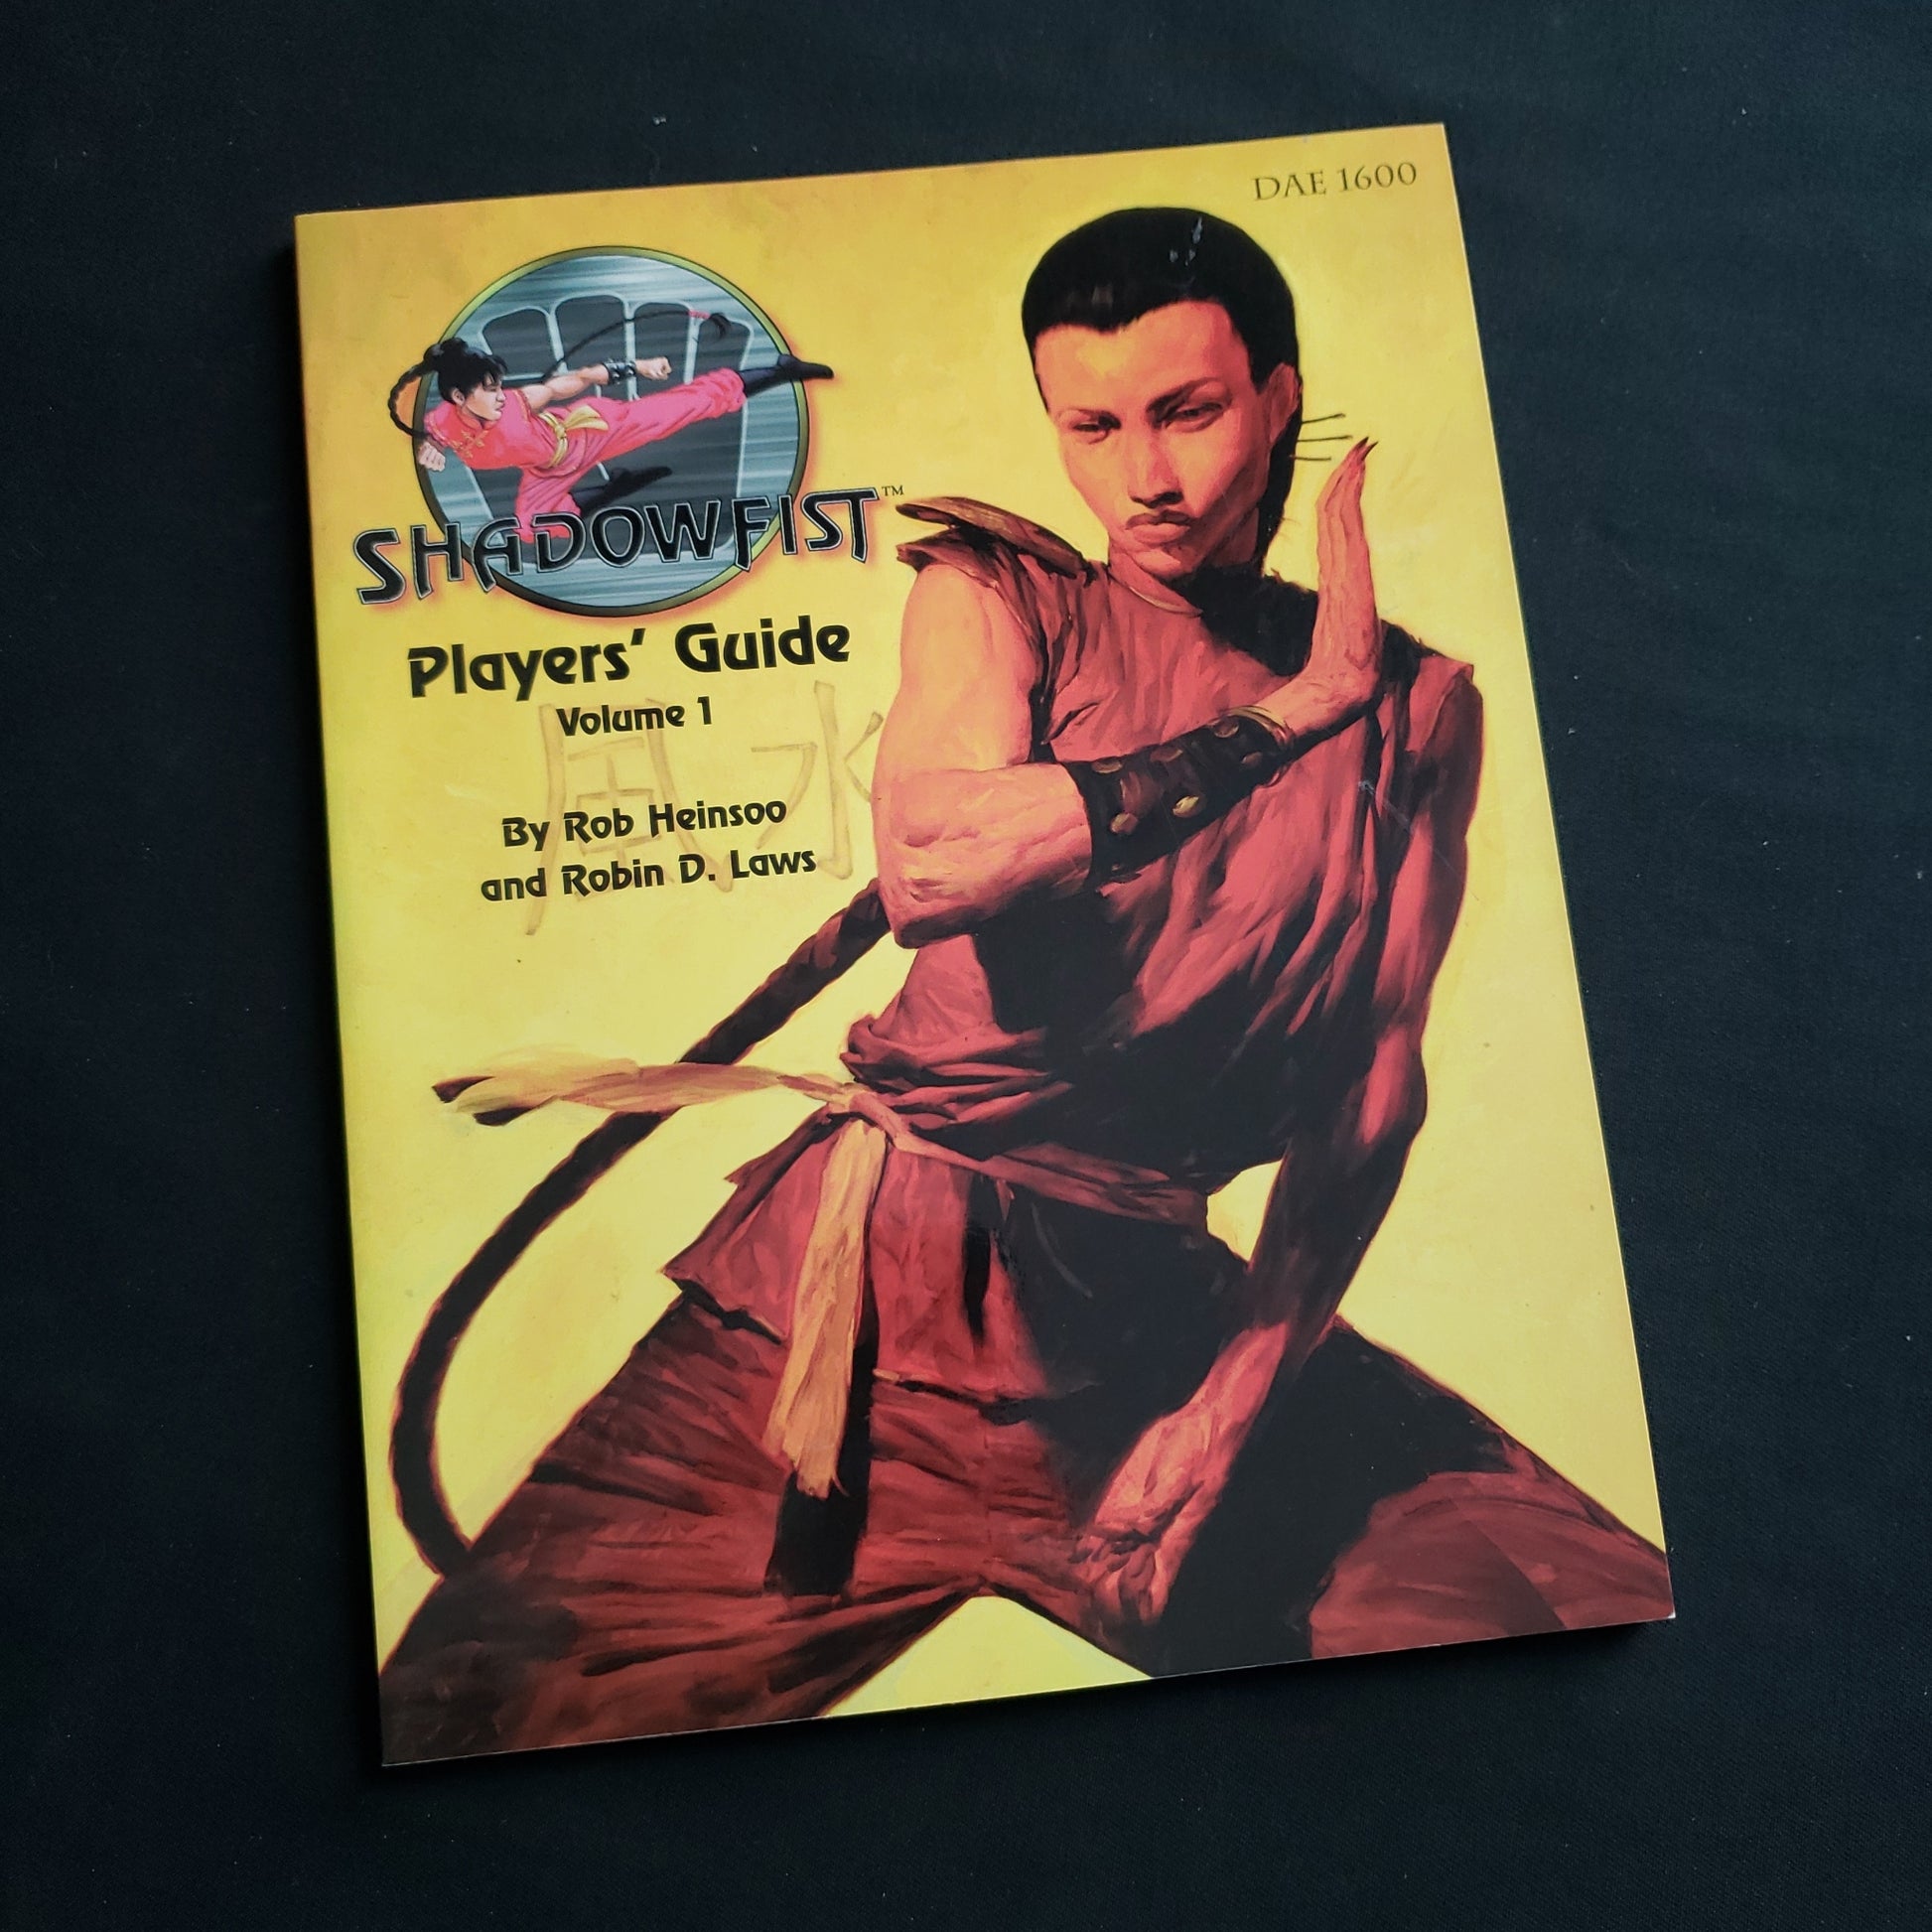 Image shows the front cover of the Players Guide Volume 1 book for the Shadowfist card game